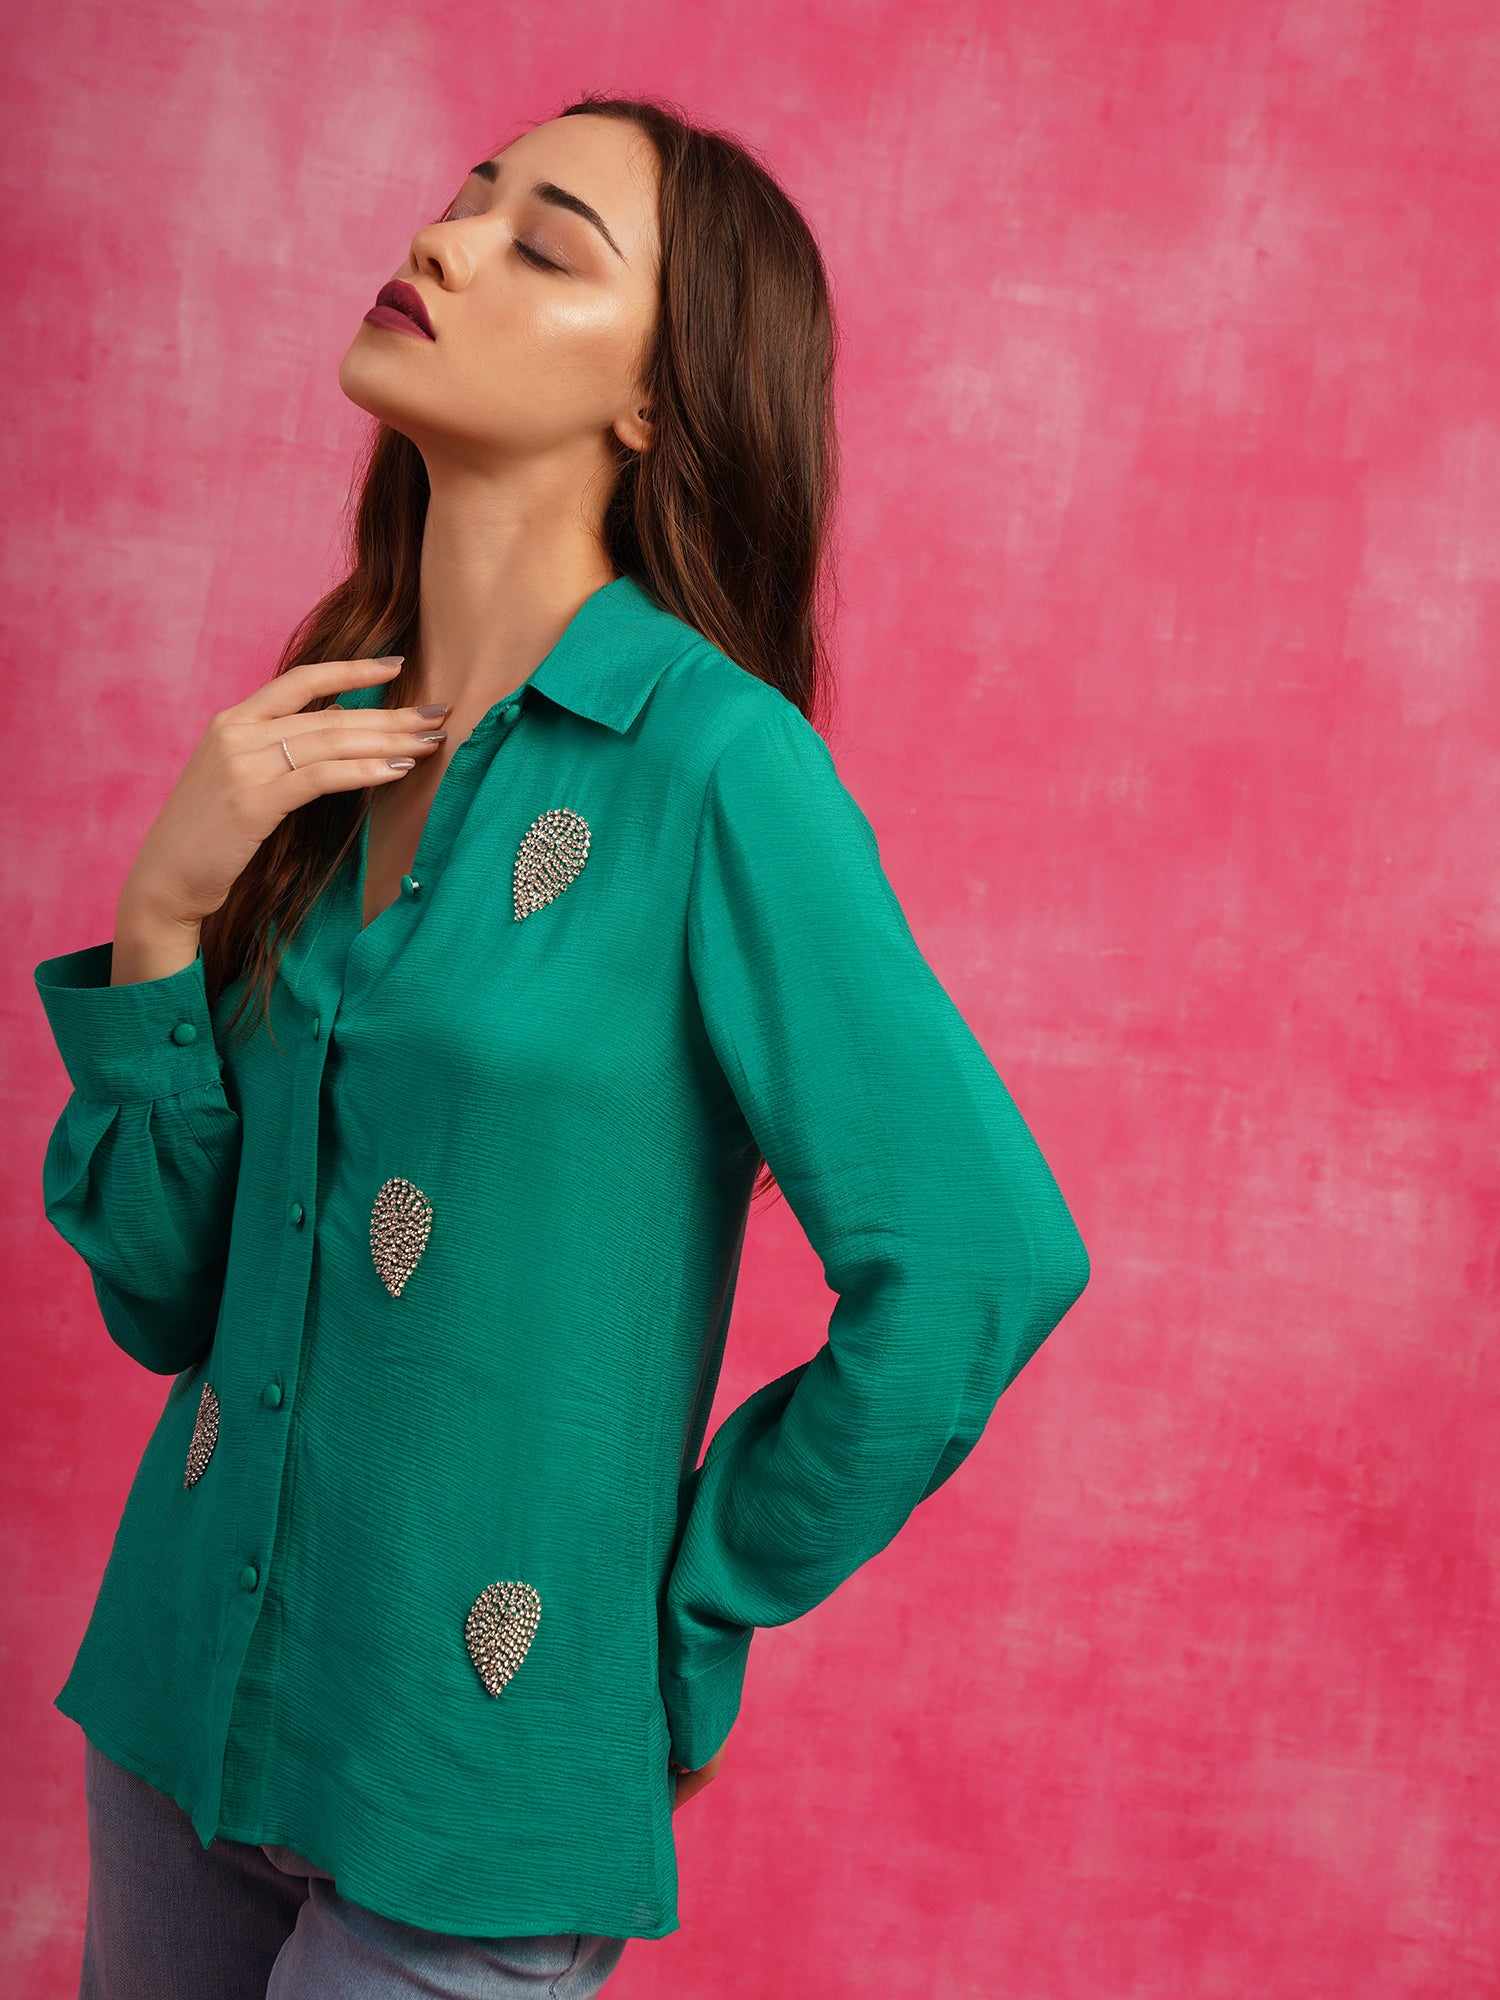 deluxe embellished green shirt  